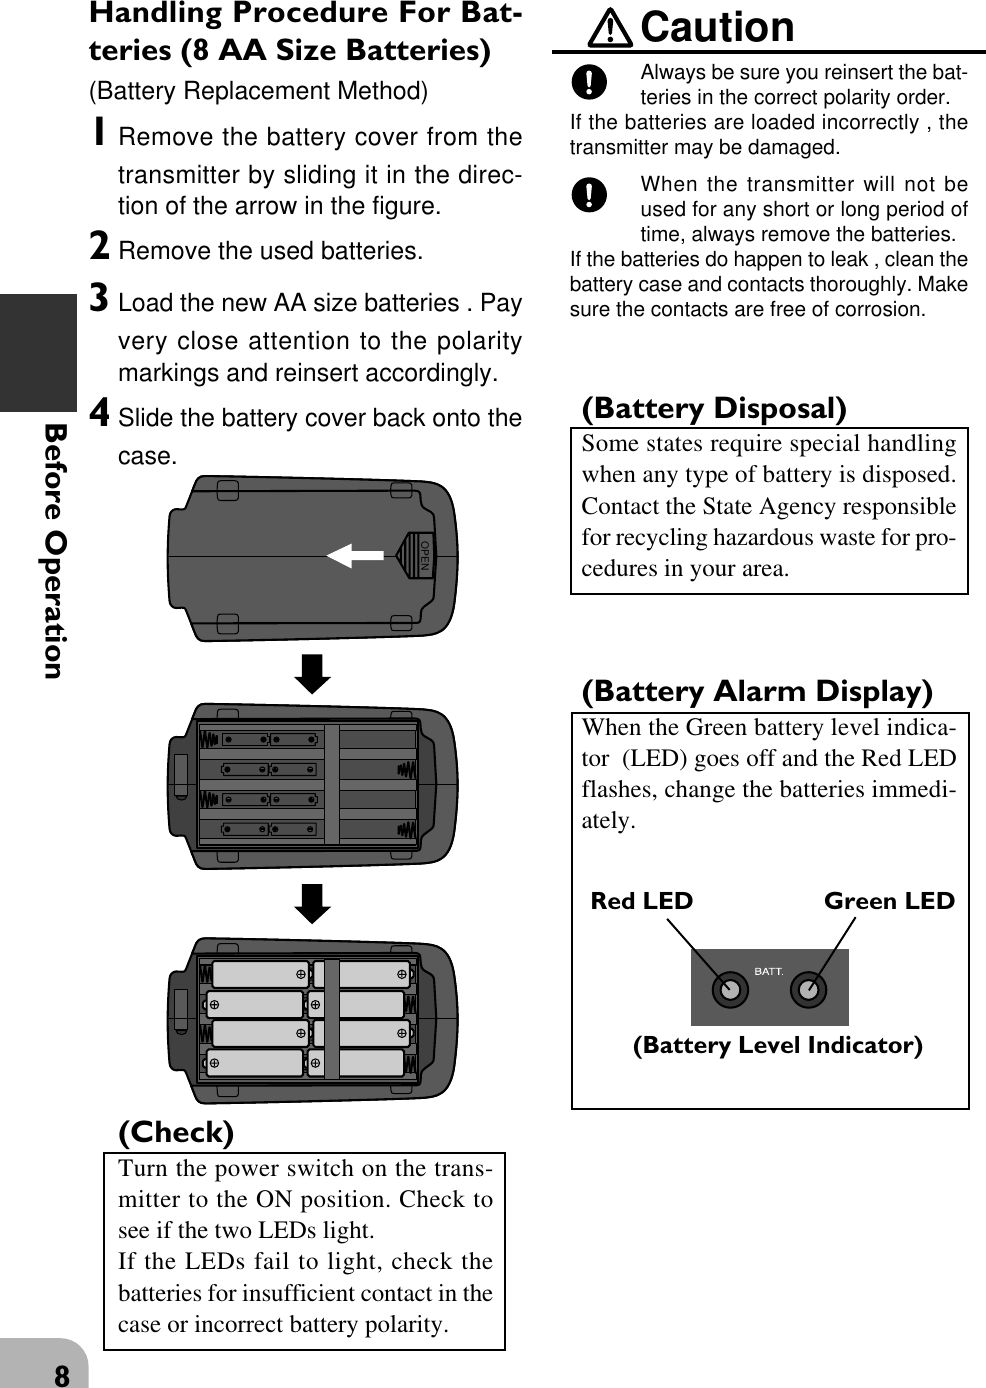 8Before OperationHandling Procedure For Bat-teries (8 AA Size Batteries)(Battery Replacement Method)1Remove the battery cover from thetransmitter by sliding it in the direc-tion of the arrow in the figure.2Remove the used batteries.3Load the new AA size batteries . Payvery close attention to the polaritymarkings and reinsert accordingly.4Slide the battery cover back onto thecase.(Check)Turn the power switch on the trans-mitter to the ON position. Check tosee if the two LEDs light.If the LEDs fail to light, check thebatteries for insufficient contact in thecase or incorrect battery polarity.CautionAlways be sure you reinsert the bat-teries in the correct polarity order.If the batteries are loaded incorrectly , thetransmitter may be damaged.When the transmitter will not beused for any short or long period oftime, always remove the batteries.If the batteries do happen to leak , clean thebattery case and contacts thoroughly. Makesure the contacts are free of corrosion.(Battery Disposal)Some states require special handlingwhen any type of battery is disposed.Contact the State Agency responsiblefor recycling hazardous waste for pro-cedures in your area.(Battery Alarm Display)When the Green battery level indica-tor  (LED) goes off and the Red LEDflashes, change the batteries immedi-ately.OPENRed LED Green LED(Battery Level Indicator)